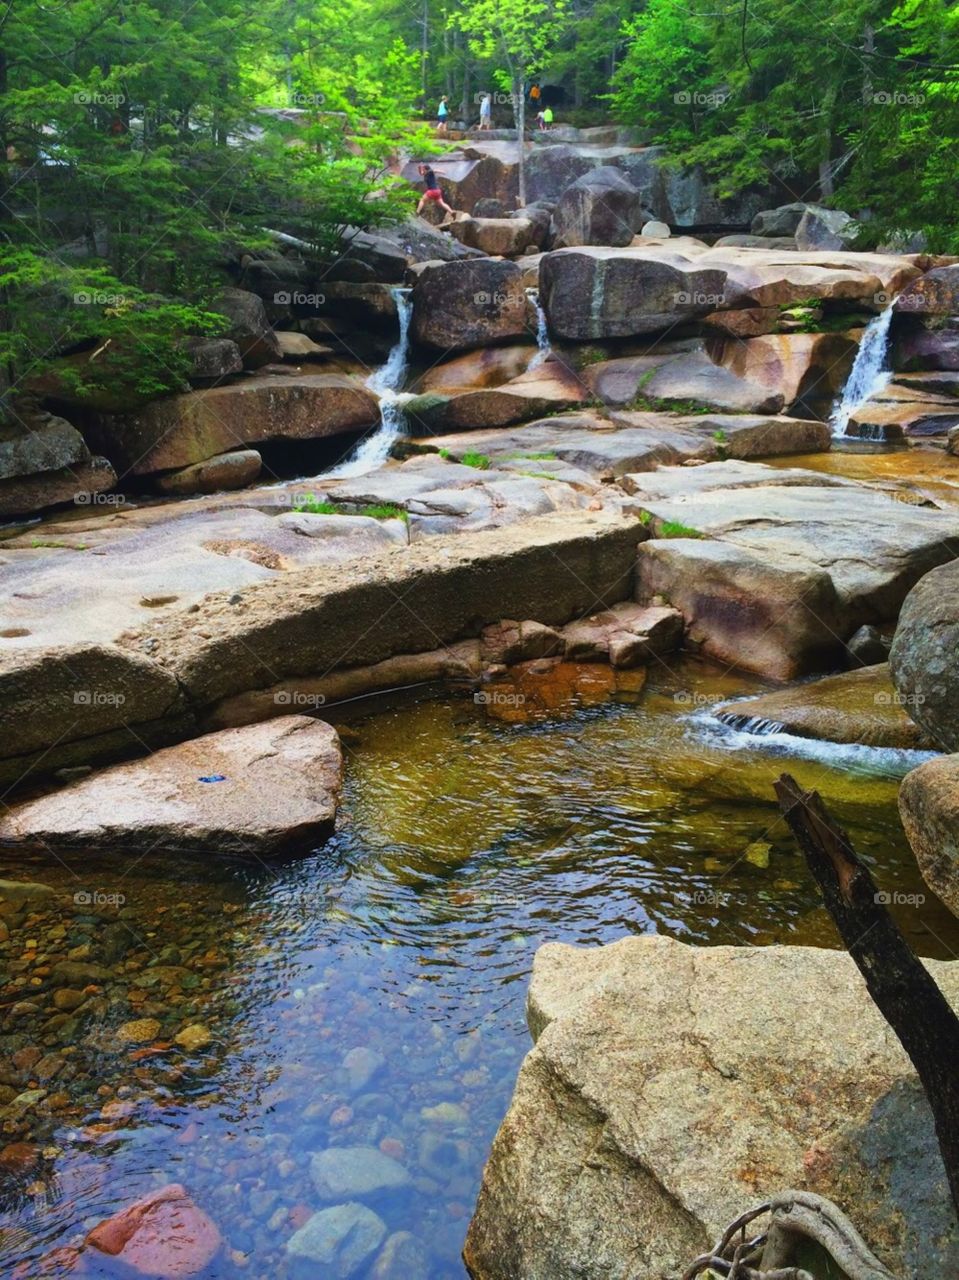 Diana’s Bath in New Hampshire. This lovely photo was taken years ago, but I just came across it once again. The bright colors, perfectly shaped rocks, and  stunning waterfalls make me want to come back here once again